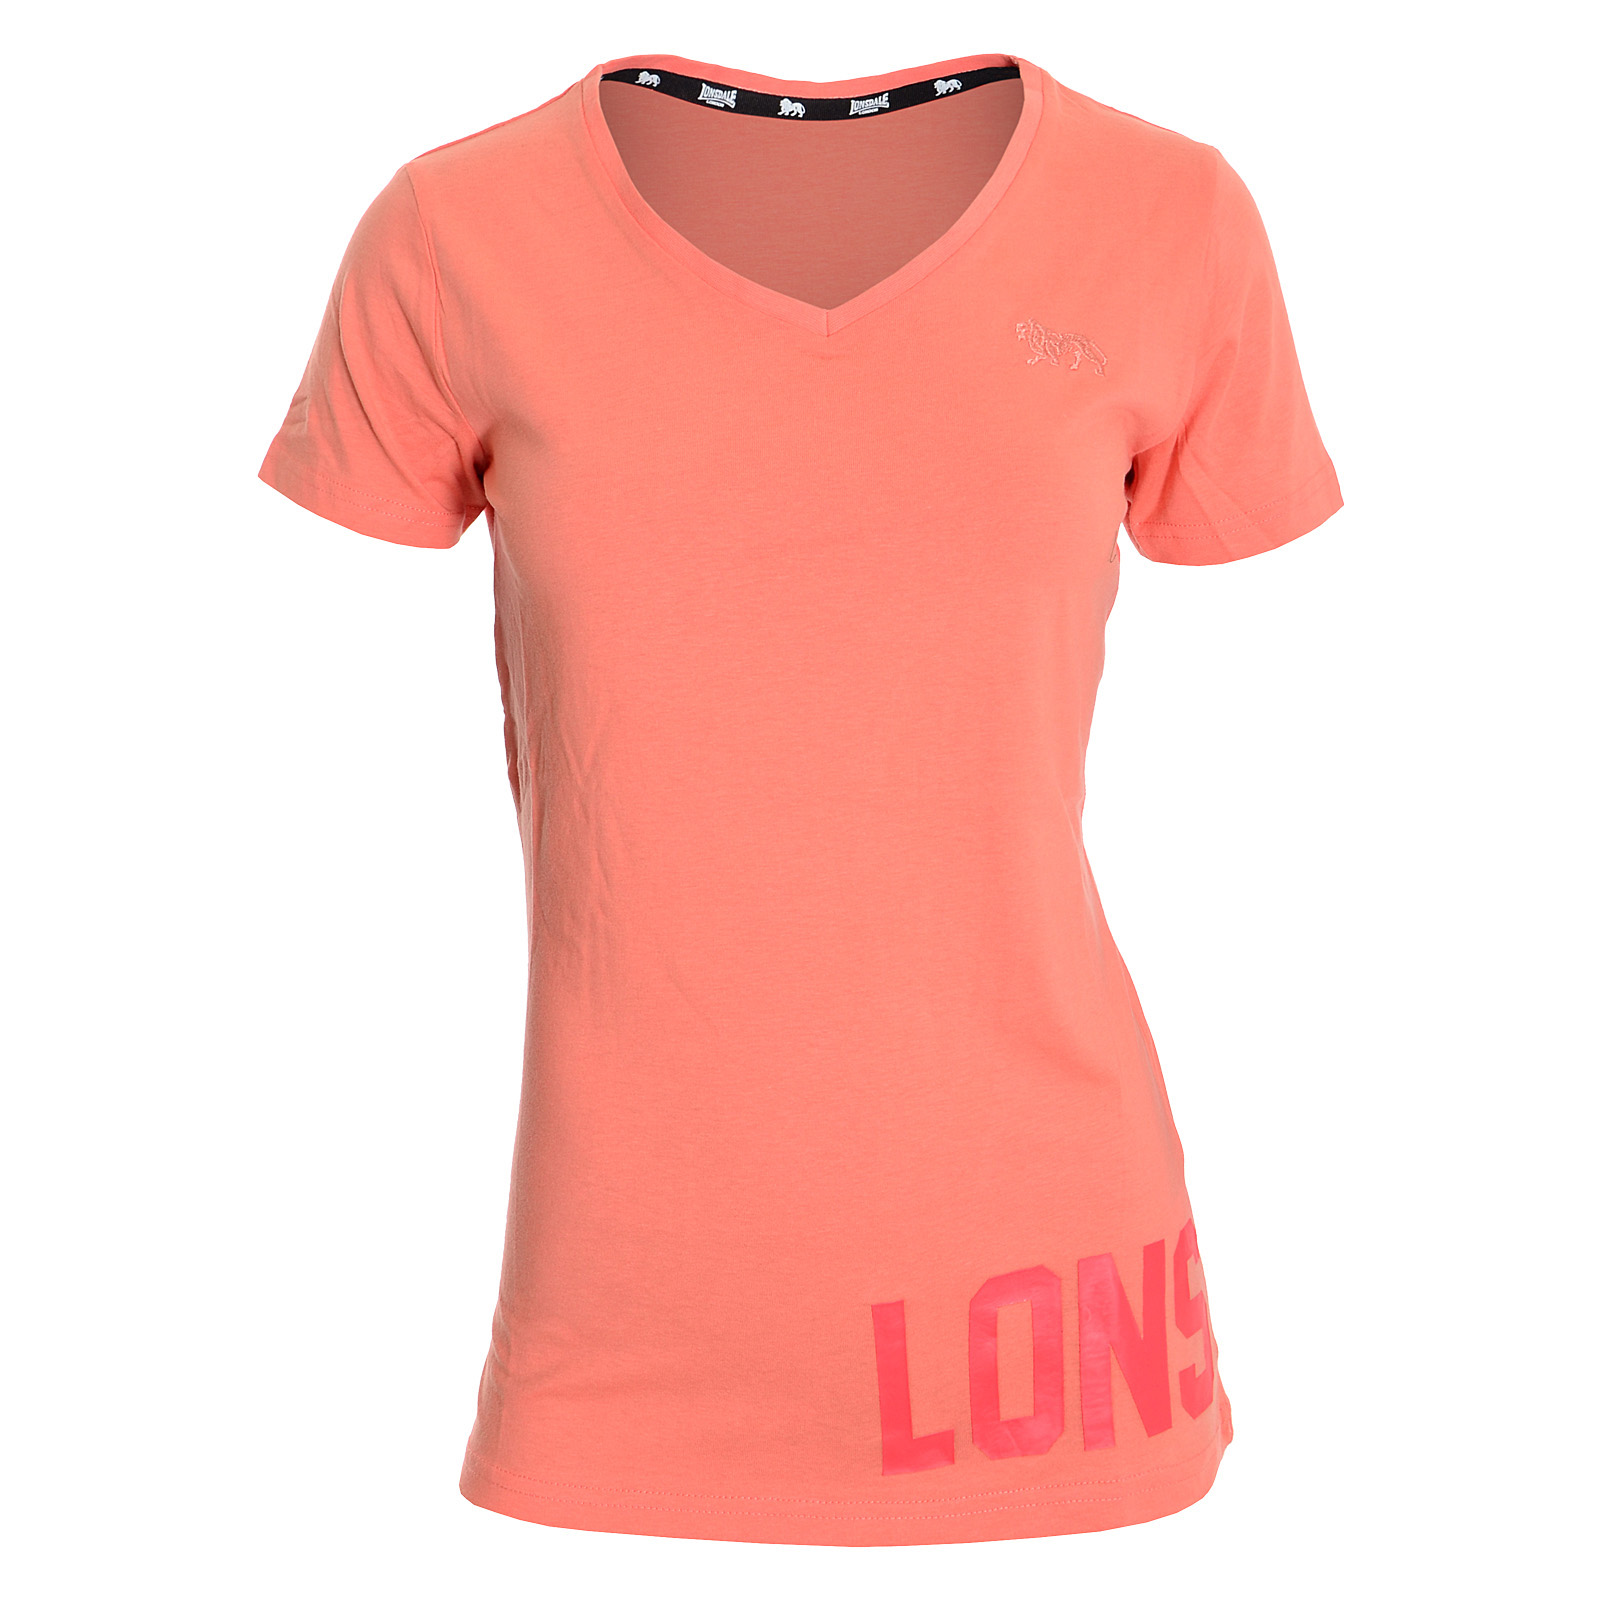 Lonsdale LADY F19 TEE 